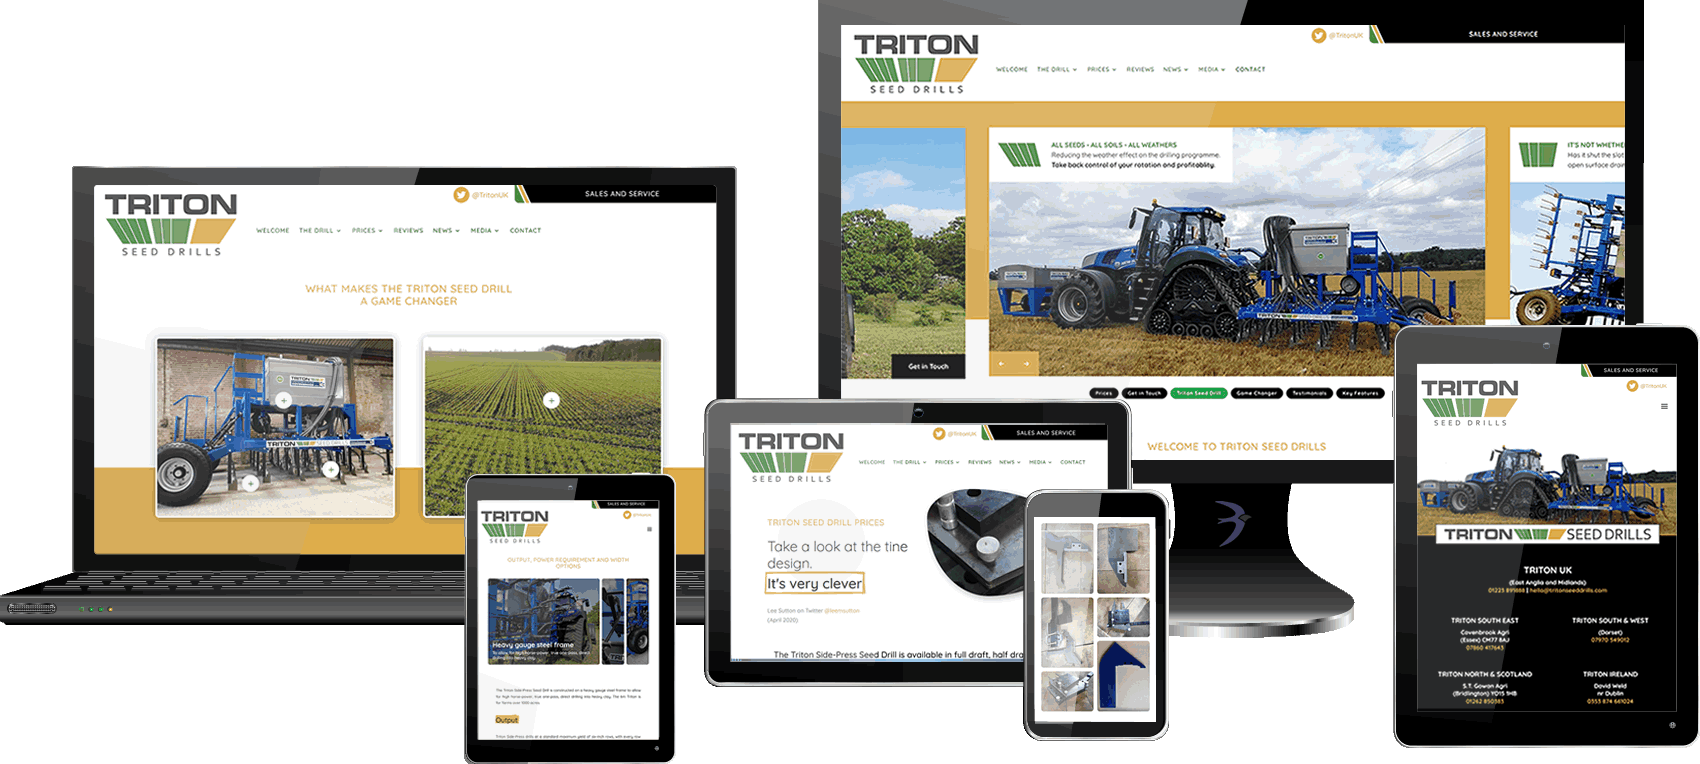 Triton Seed Drills website redesign by Mdsign